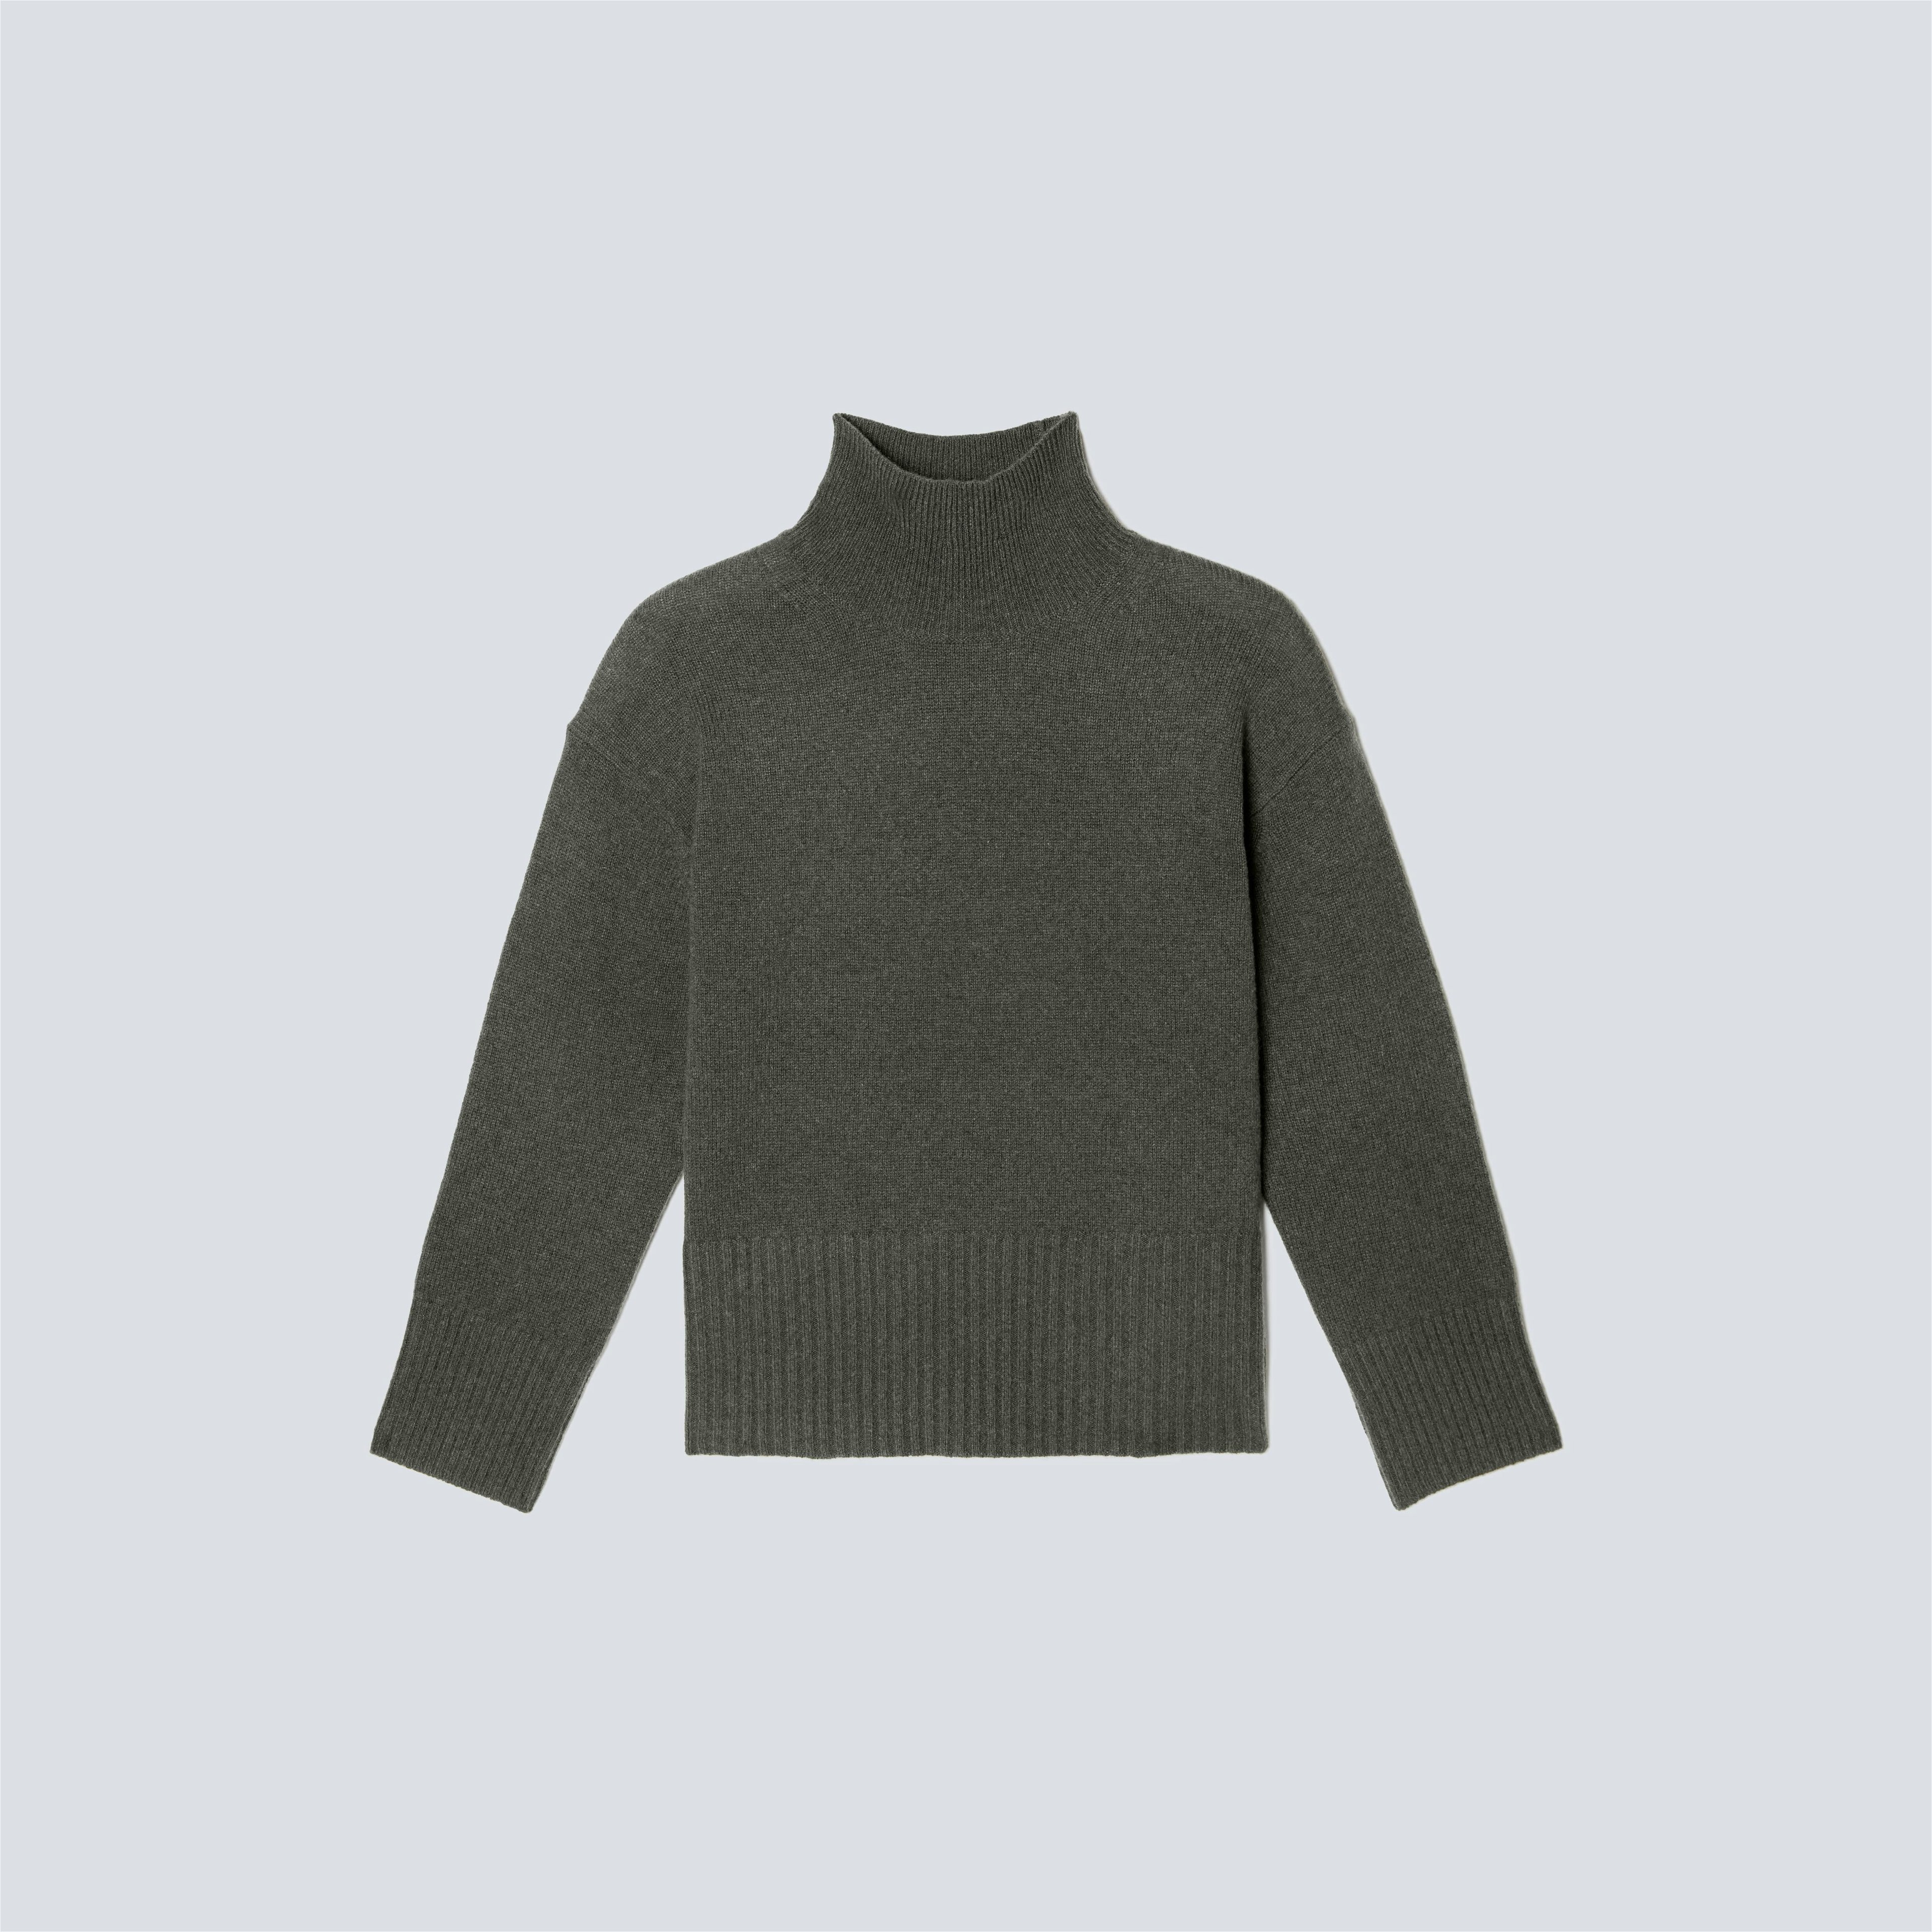 The Cashmere Oversized Turtleneck by EVERLANE